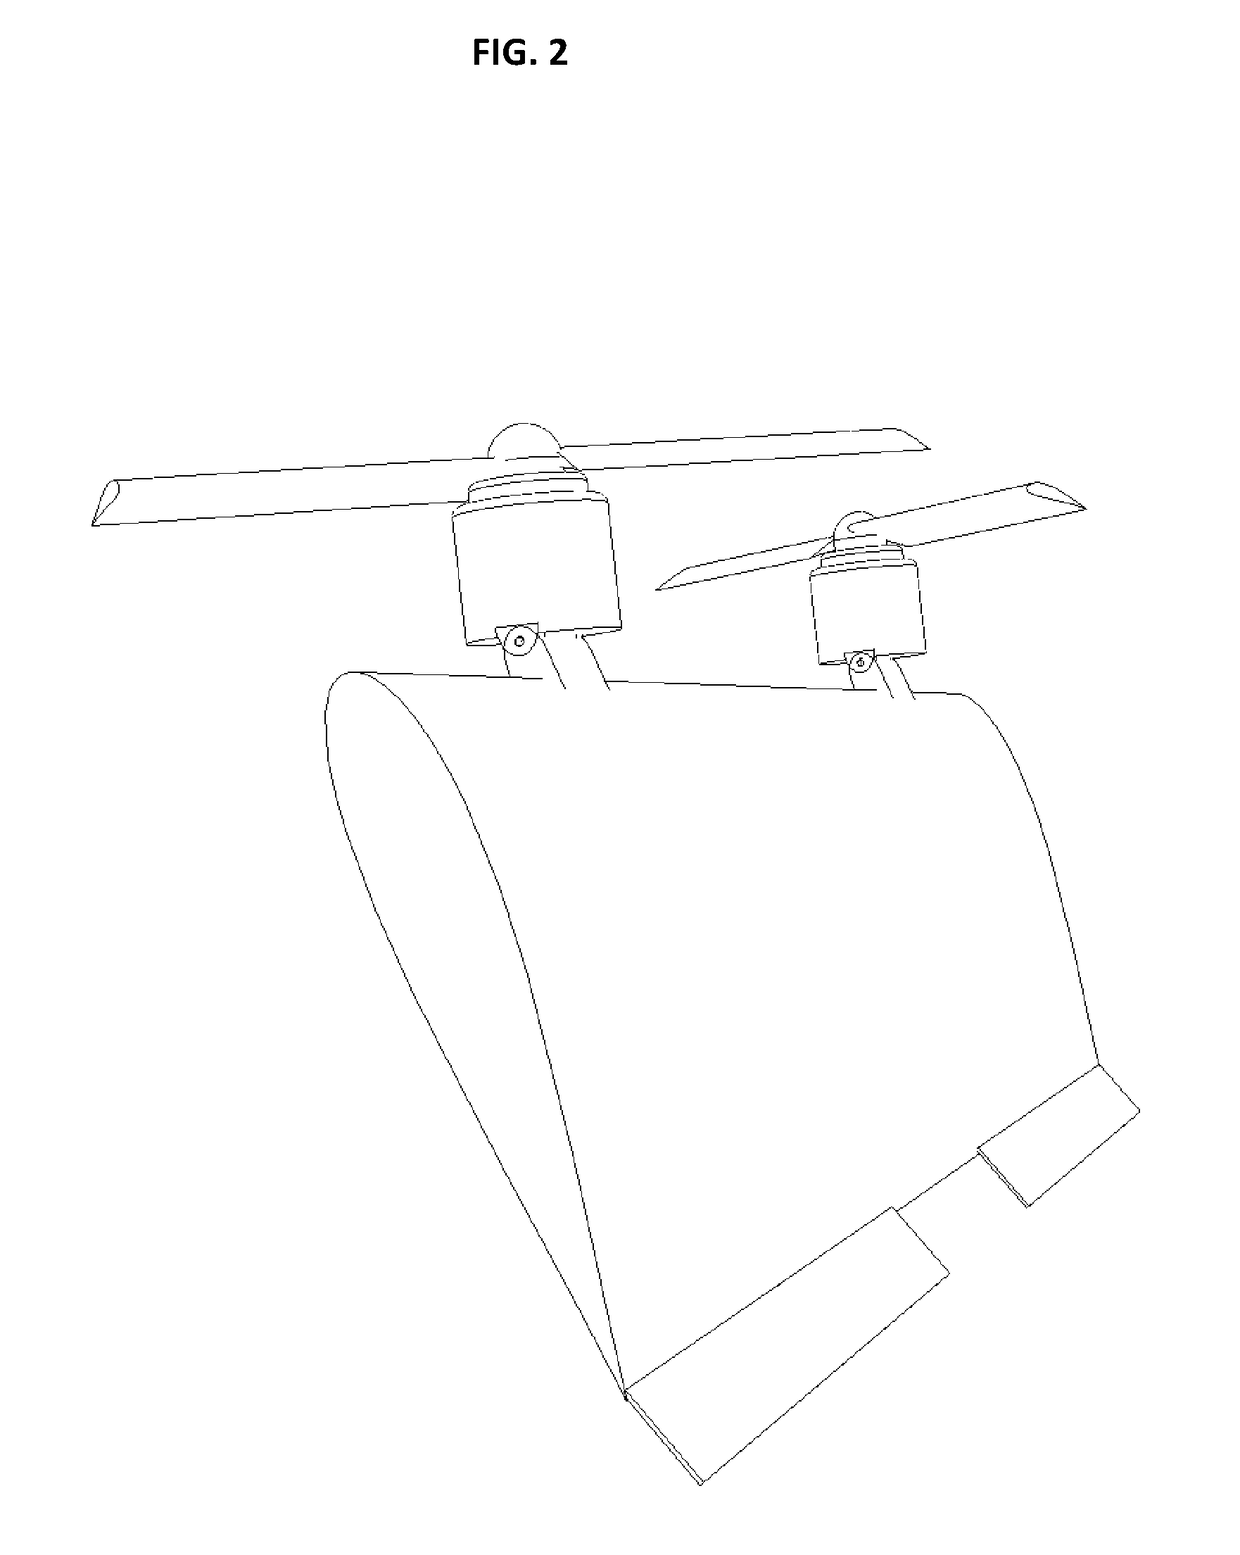 VTOL airplane or drone utilizing at least two tilting propellers located in front of wings center of gravity.